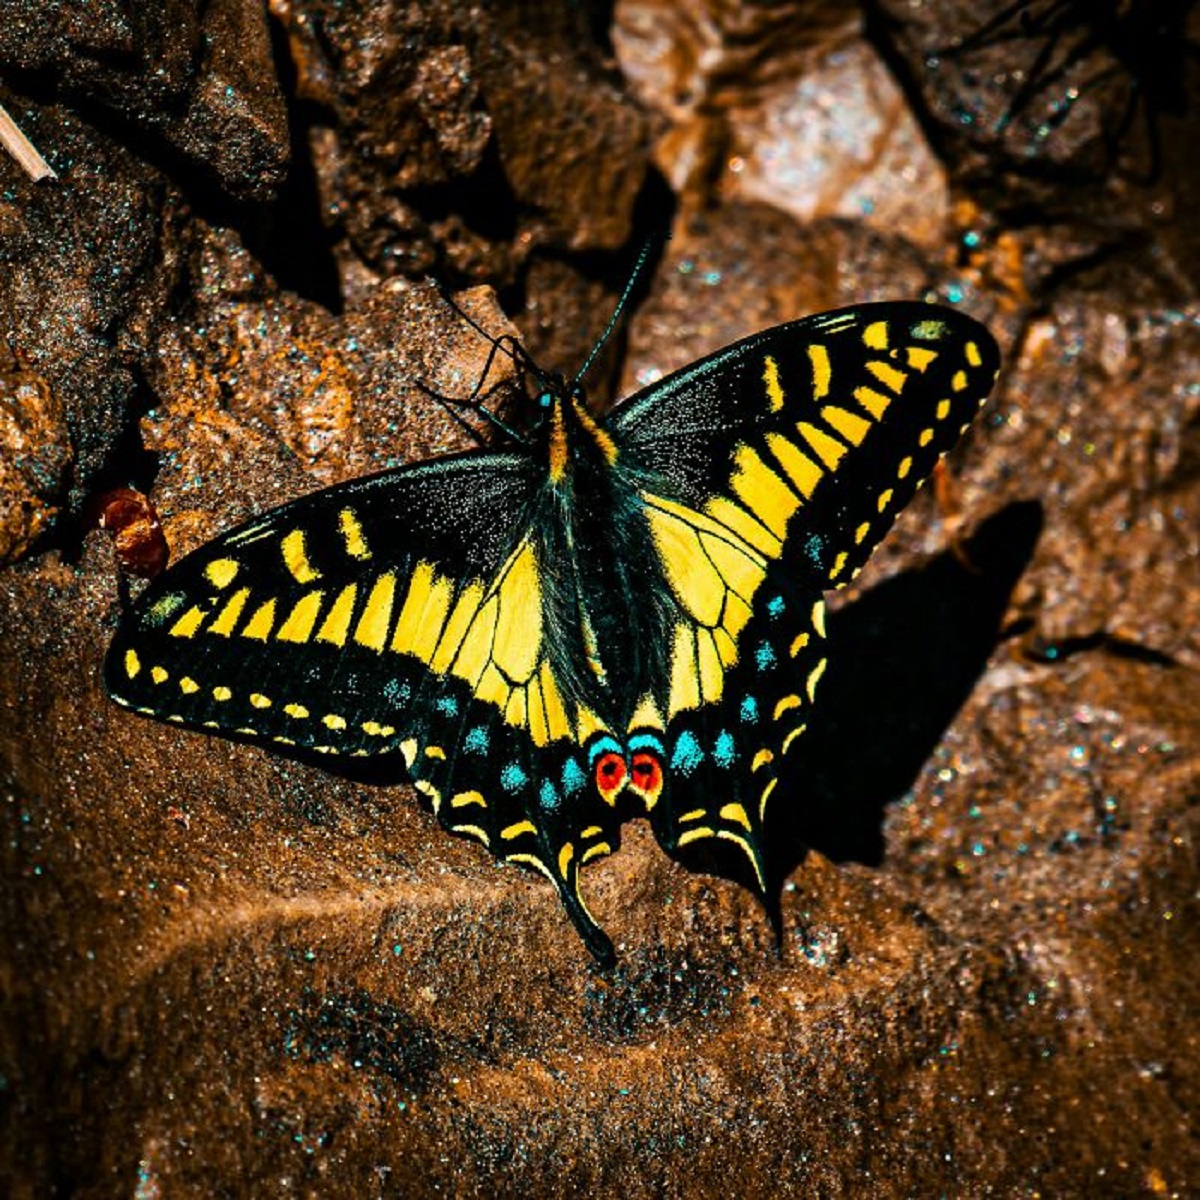 Male swallowtail butterflies have eyes on their [male genital] so they can position themselves correctly when mating.